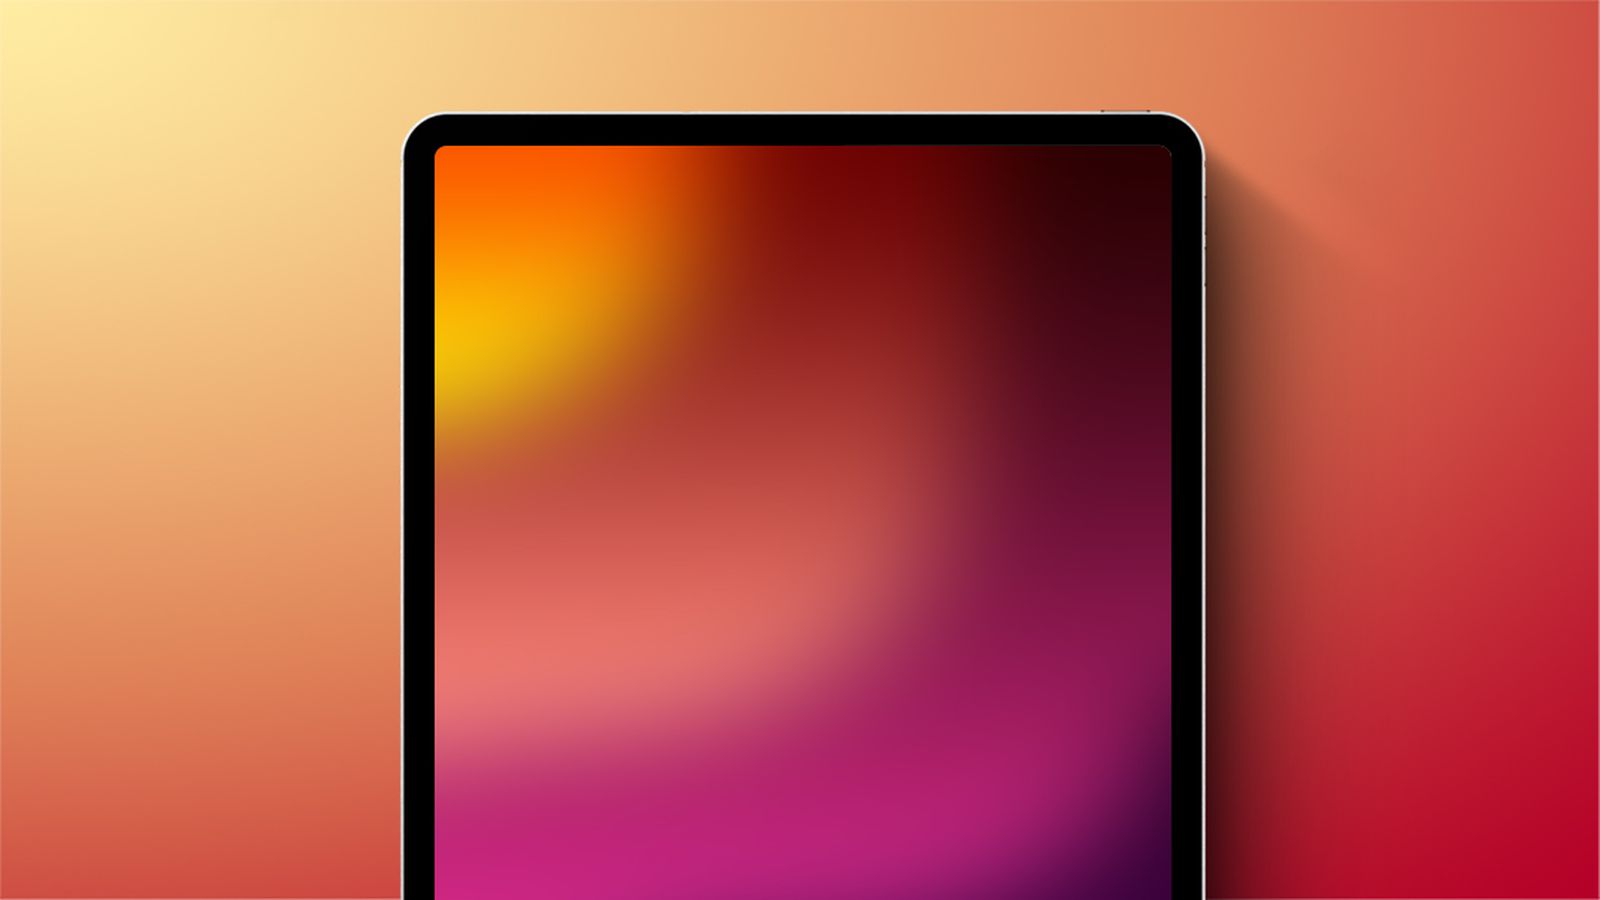 Barclays: iPad with OLED display is unlikely to launch by 2022 at the earliest